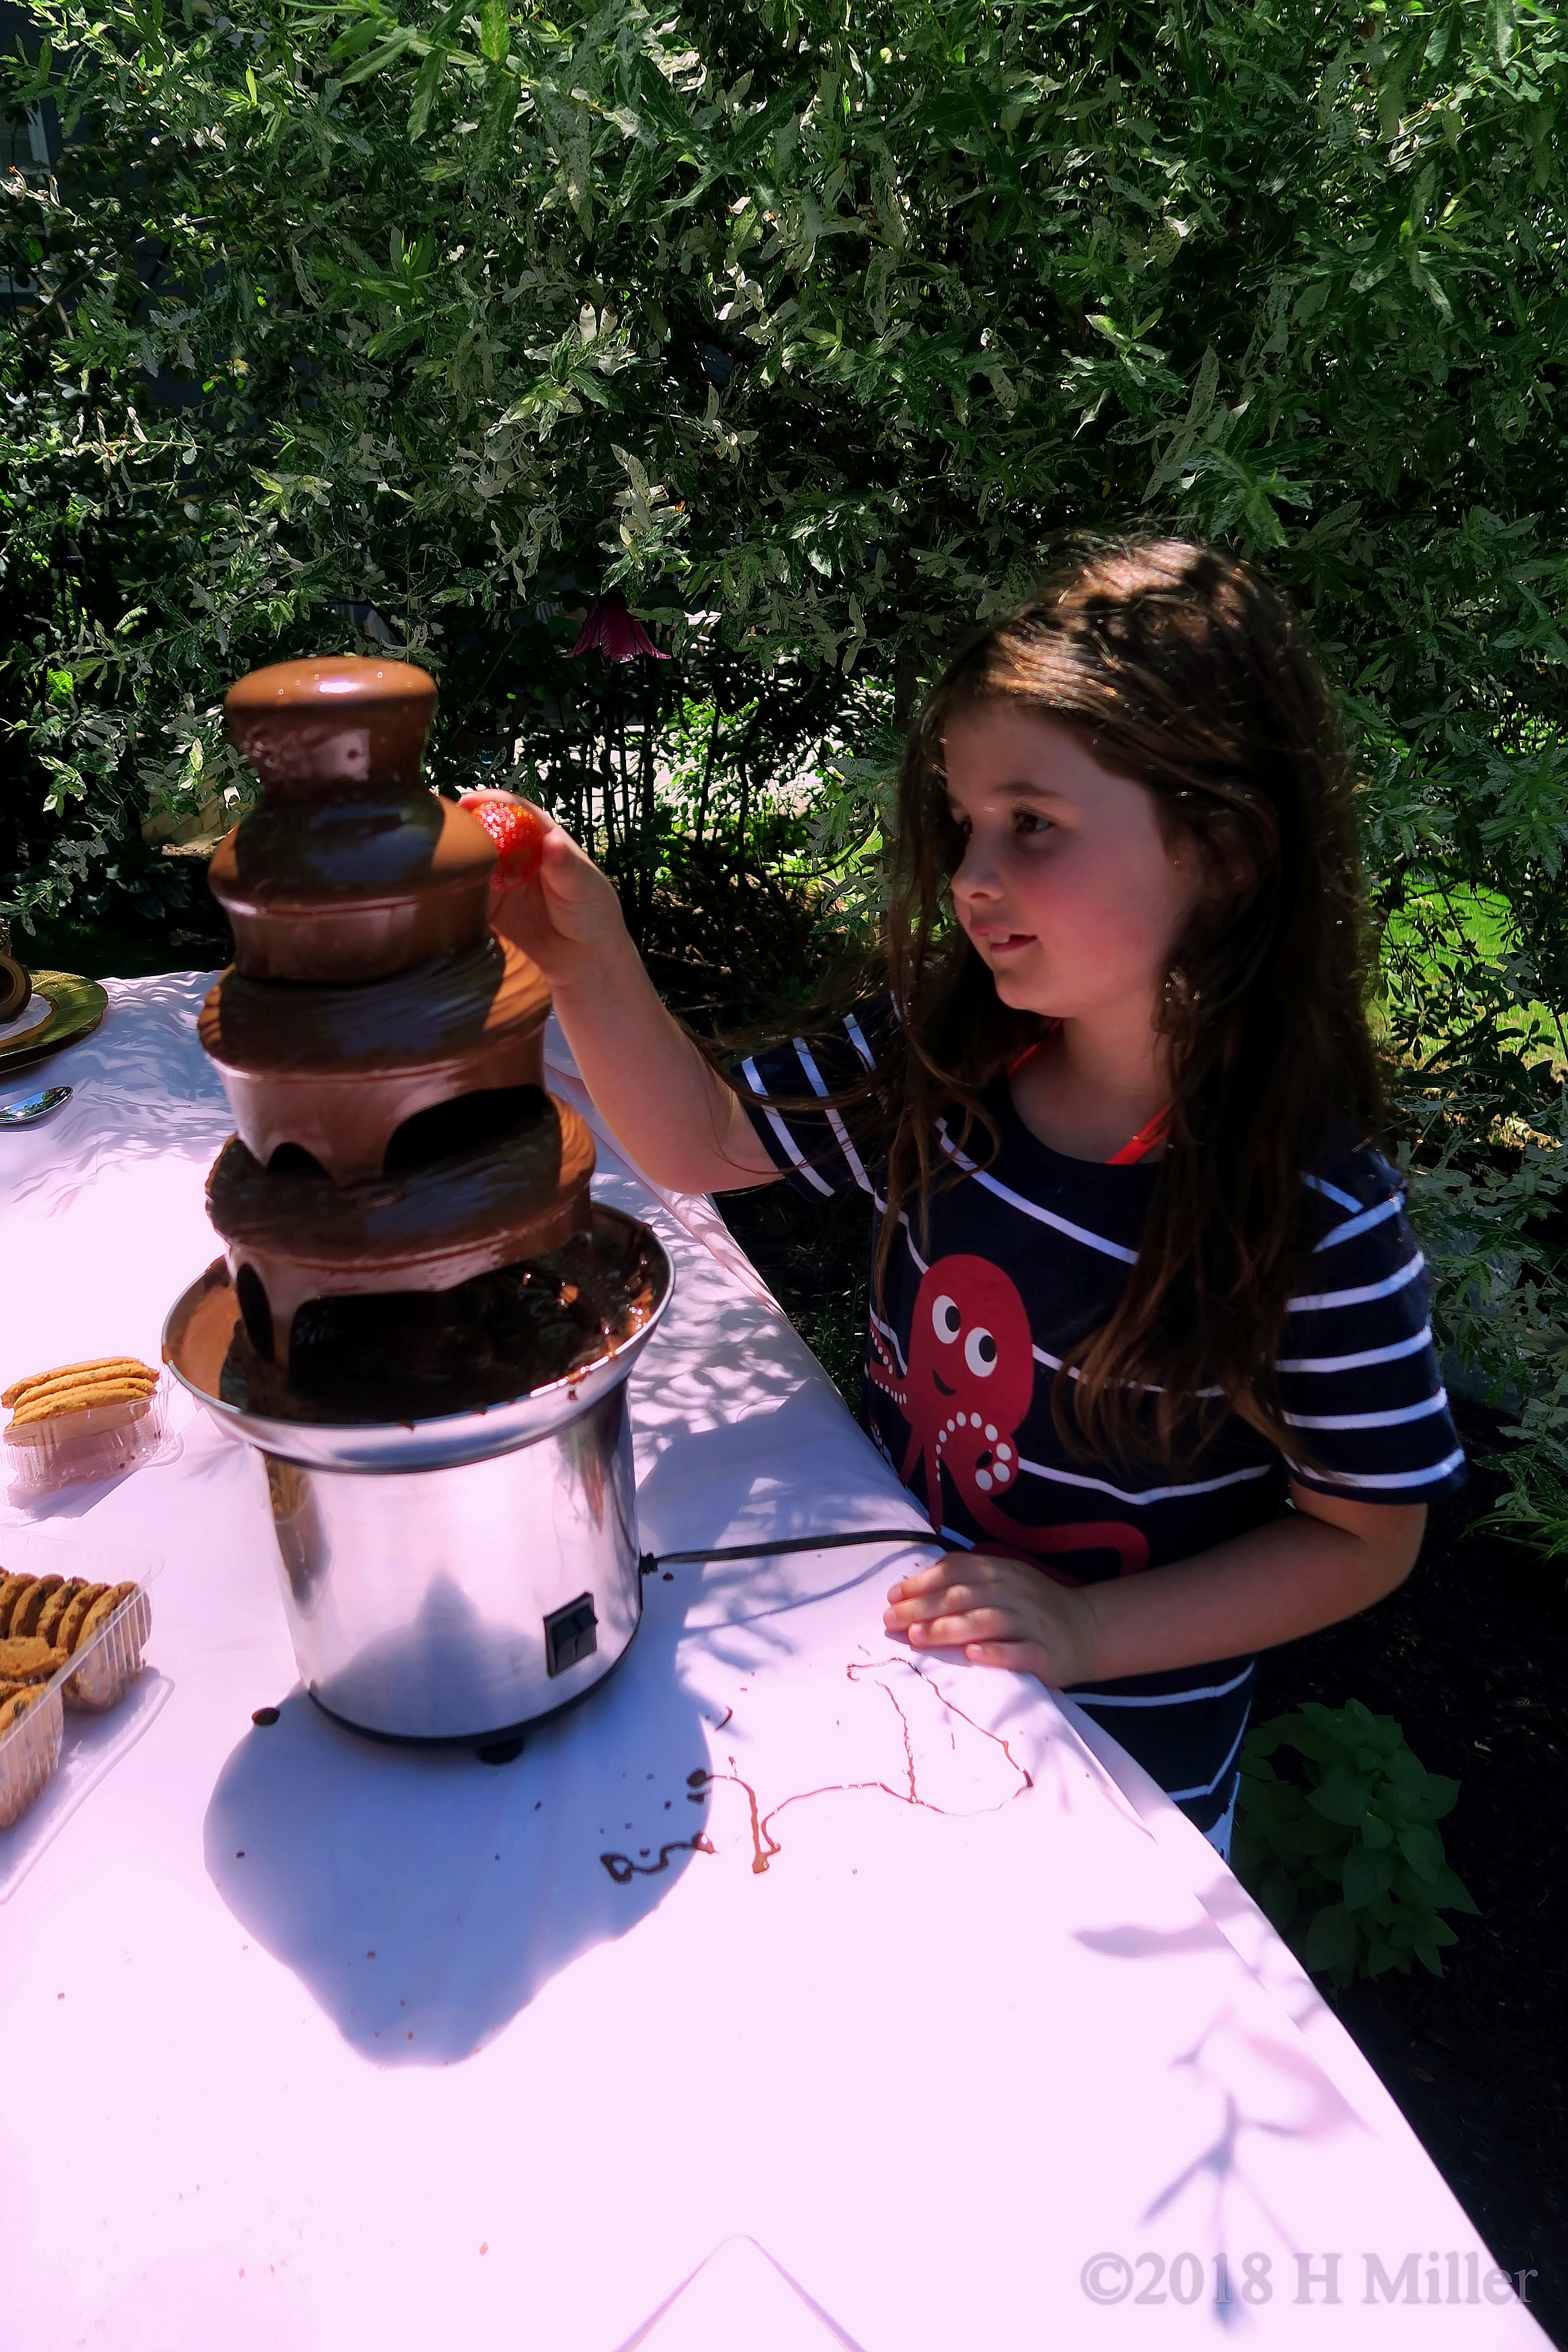 Make Your Own Chocolate Covered Strawberries With The Chocolate Fountain! 